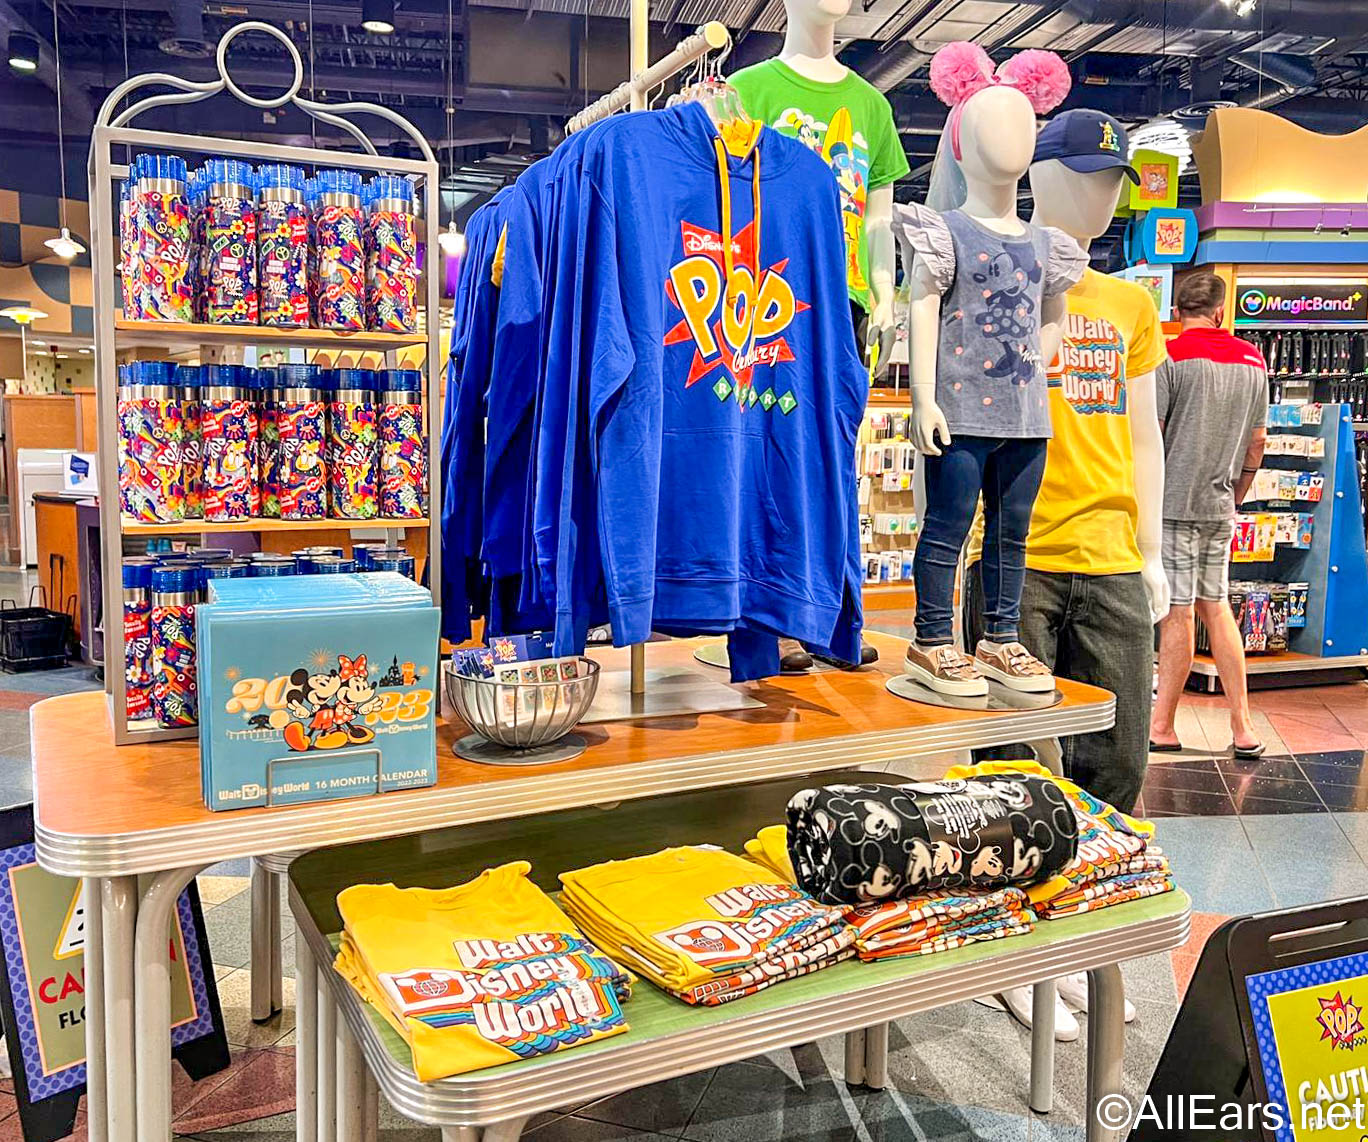 2022-wdw-pop-century-resort-everything-pop-shopping-and-dining-display-merch -merchandise - AllEars.Net